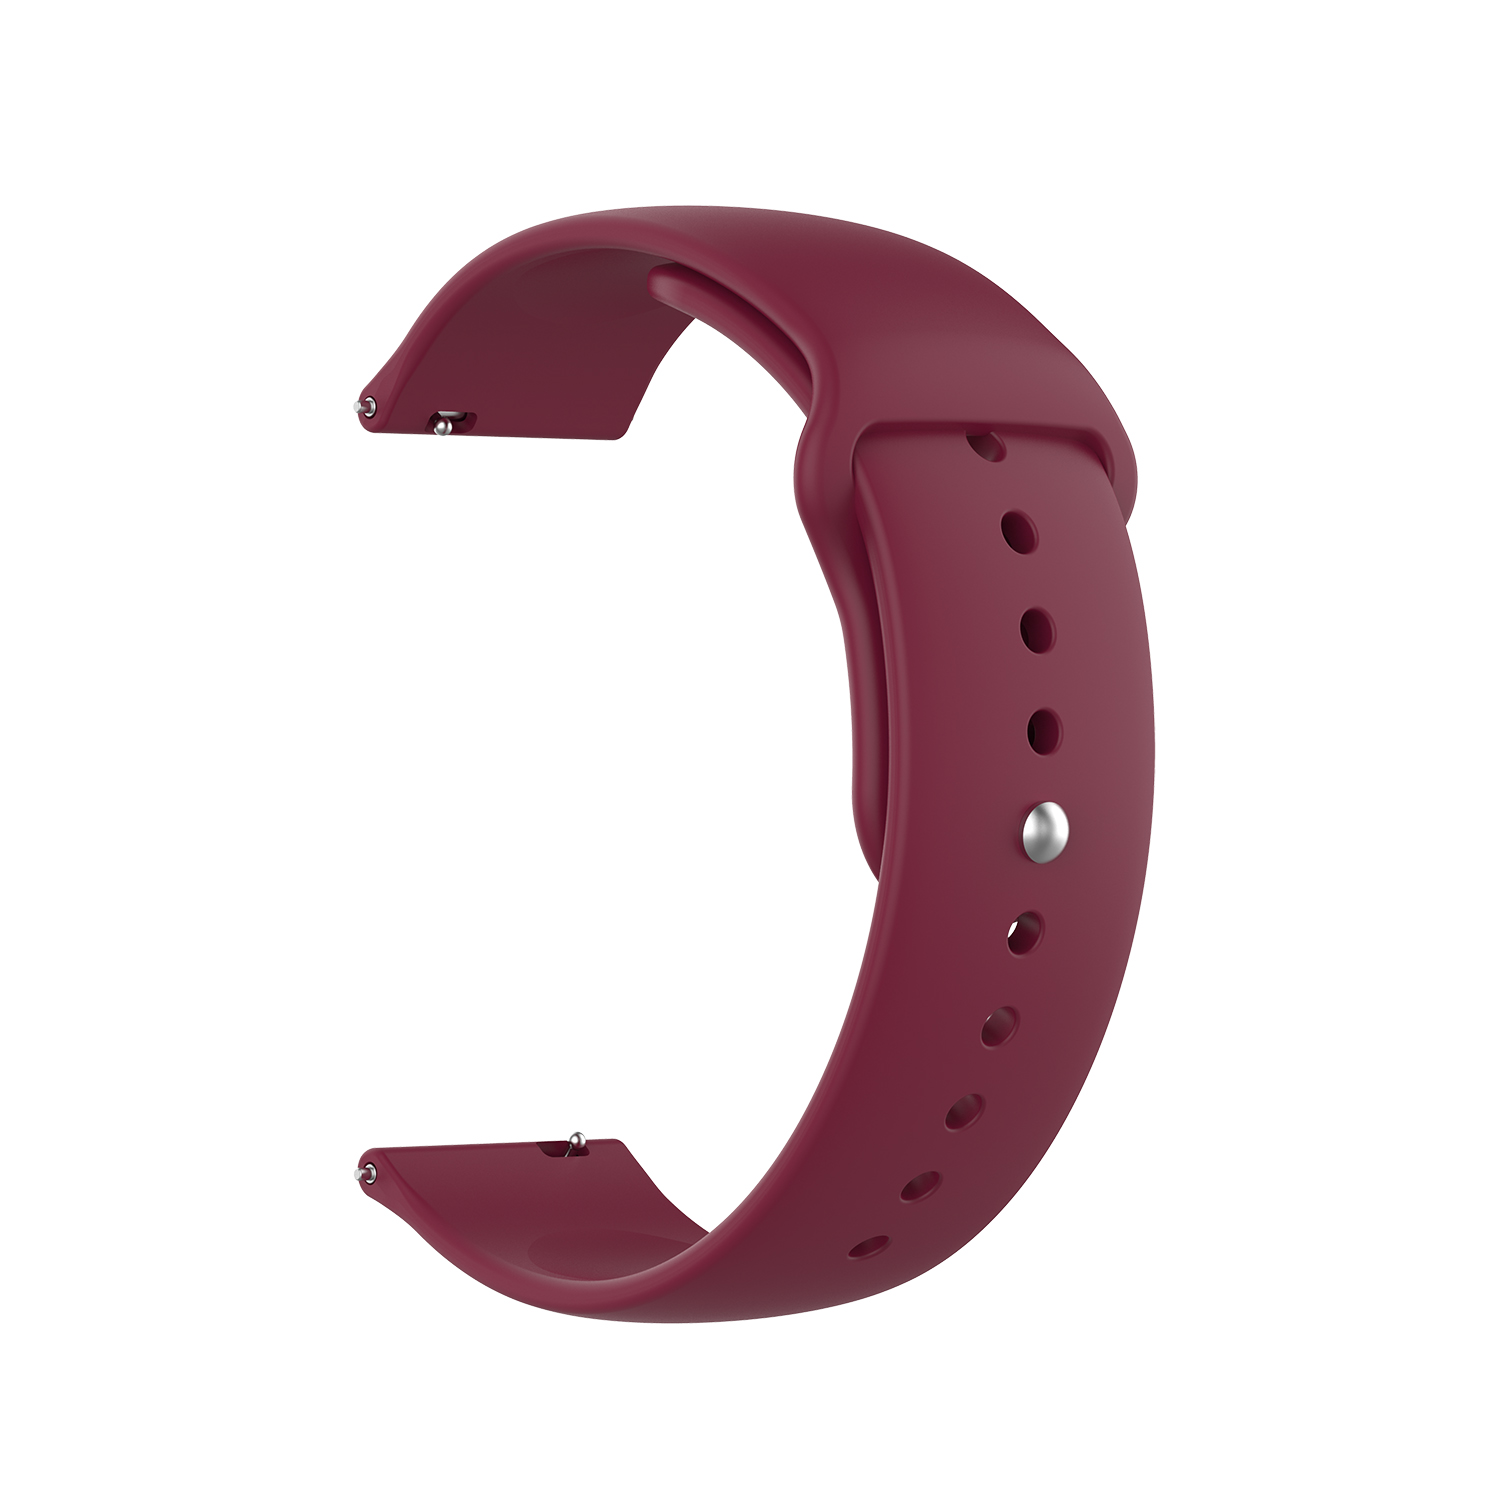 Bakeey-18mm-SLR-Buckle-Silicone-Replacement-Strap-Smart-Watch-Band-For-Ticwatch-C2-Rose-Gold-Version-1739113-6